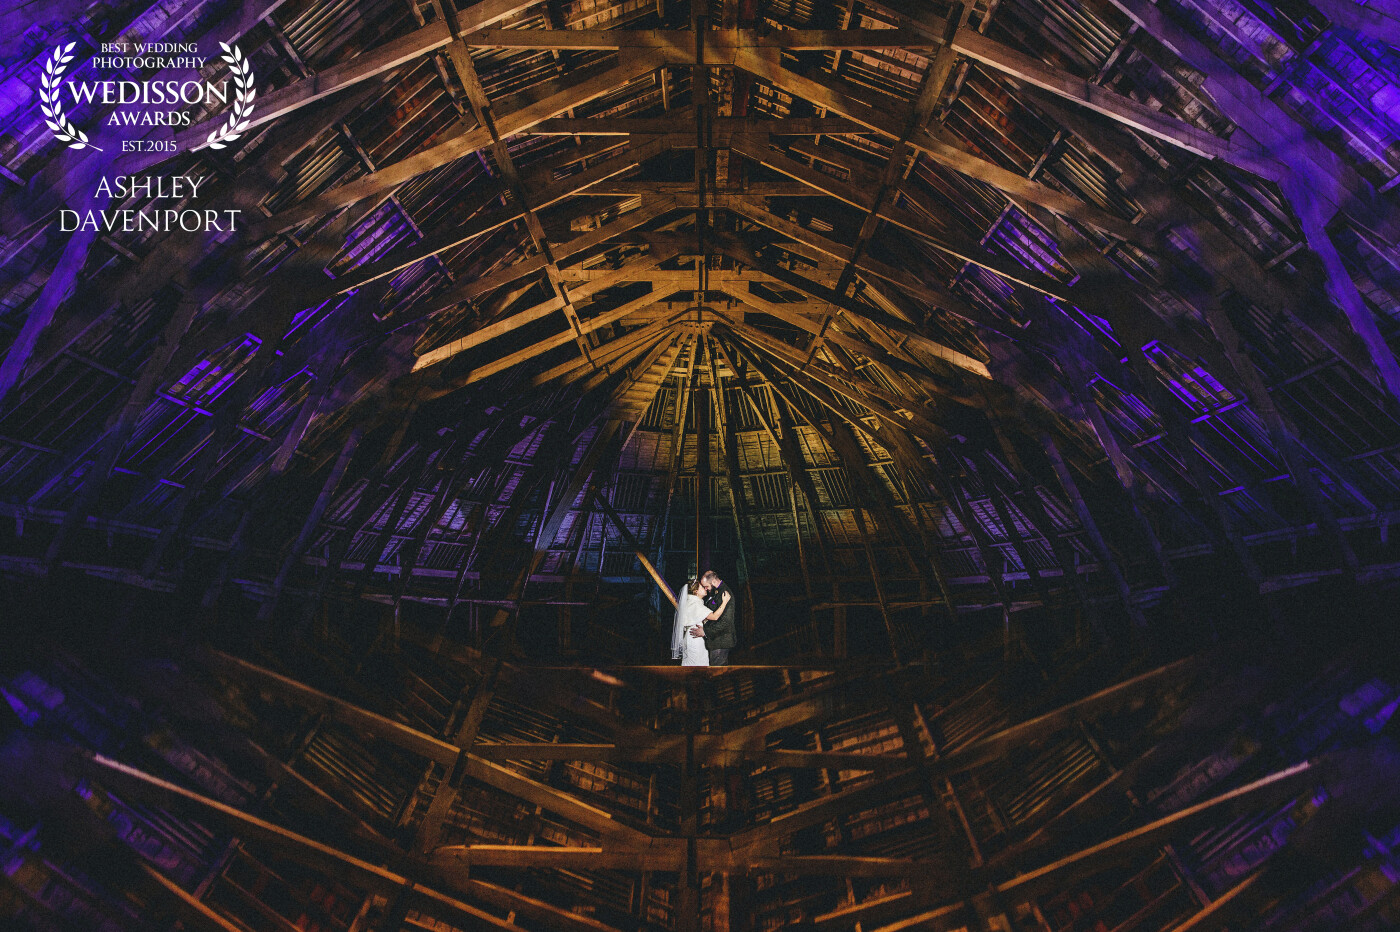 Abi and Pat got married at the Chatham Historic Dockyard (yes, this image was taken inside the venue), we had 5 minutes to grab an image of them just after the service. I saw the lights on the roof of the dockyard and with a handy reflection I managed to capture this.